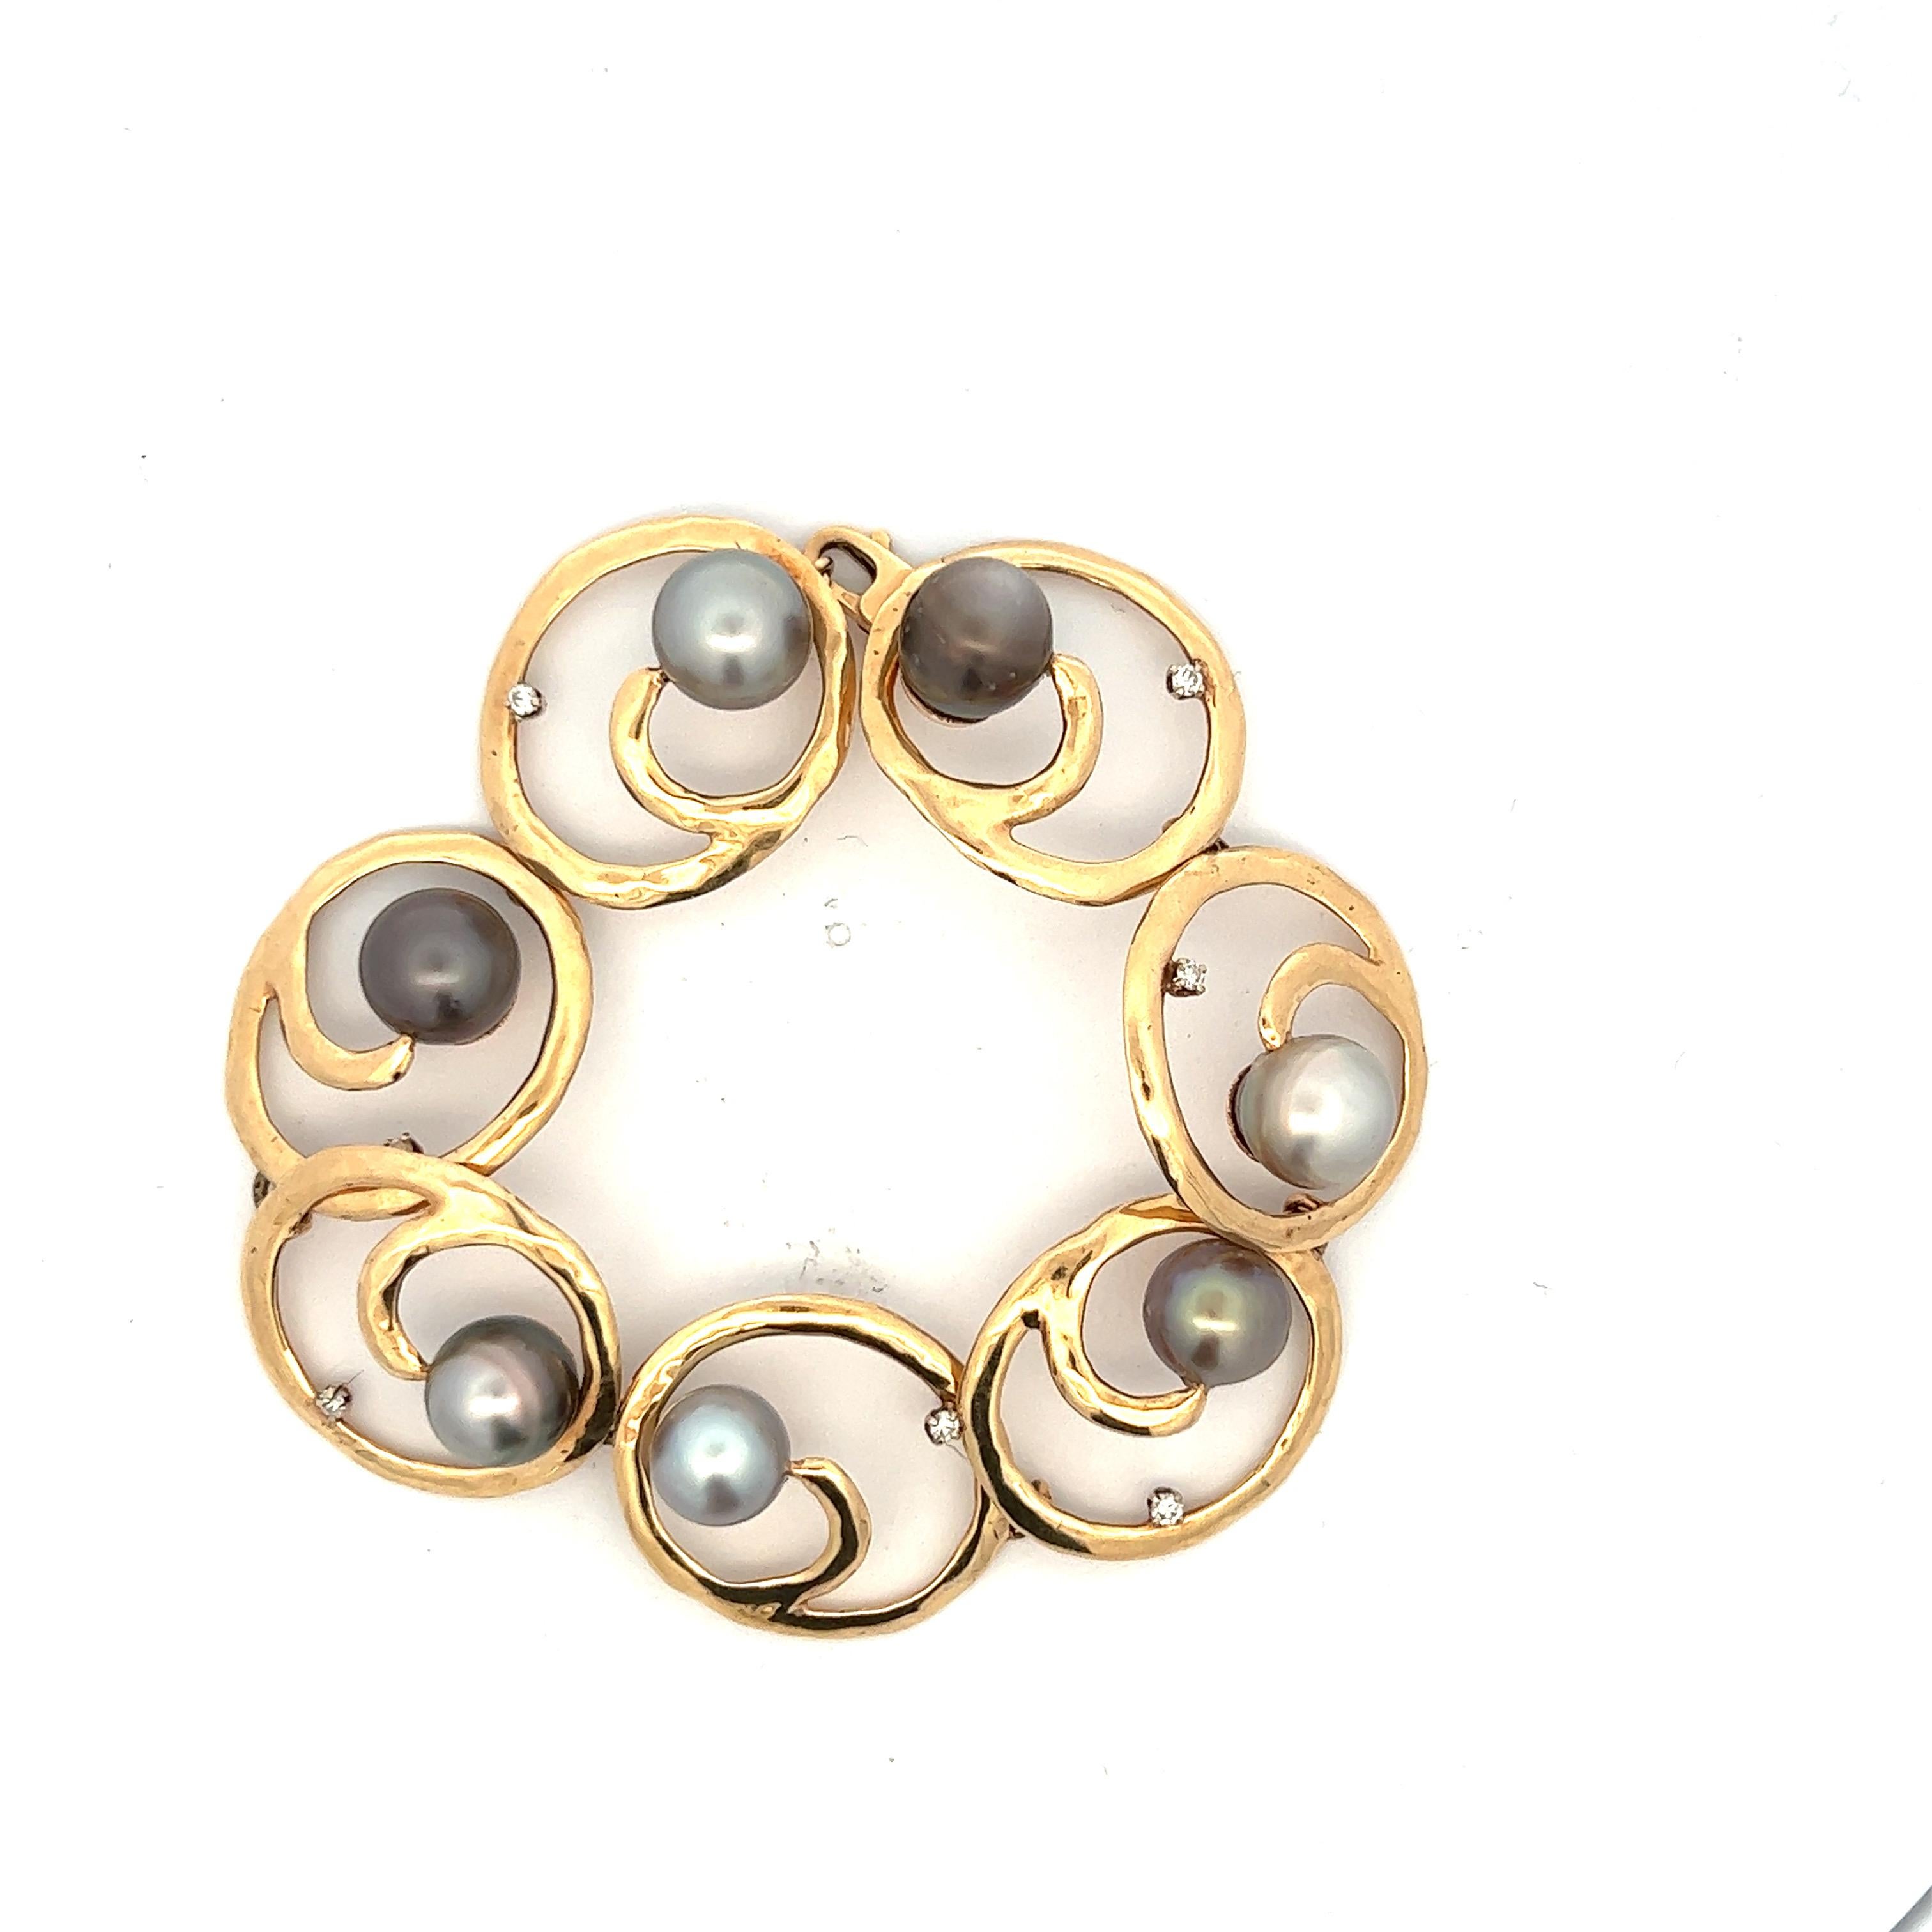 South Sea pearl and diamond bracelet fashioned in 14 karat yellow gold. The bracelet features open circle links with 7 round brilliant cut diamonds and 7 South Sea pearls. The diamonds weigh approximately .28 CTW and the pearls measure 9.5-10.5mm in